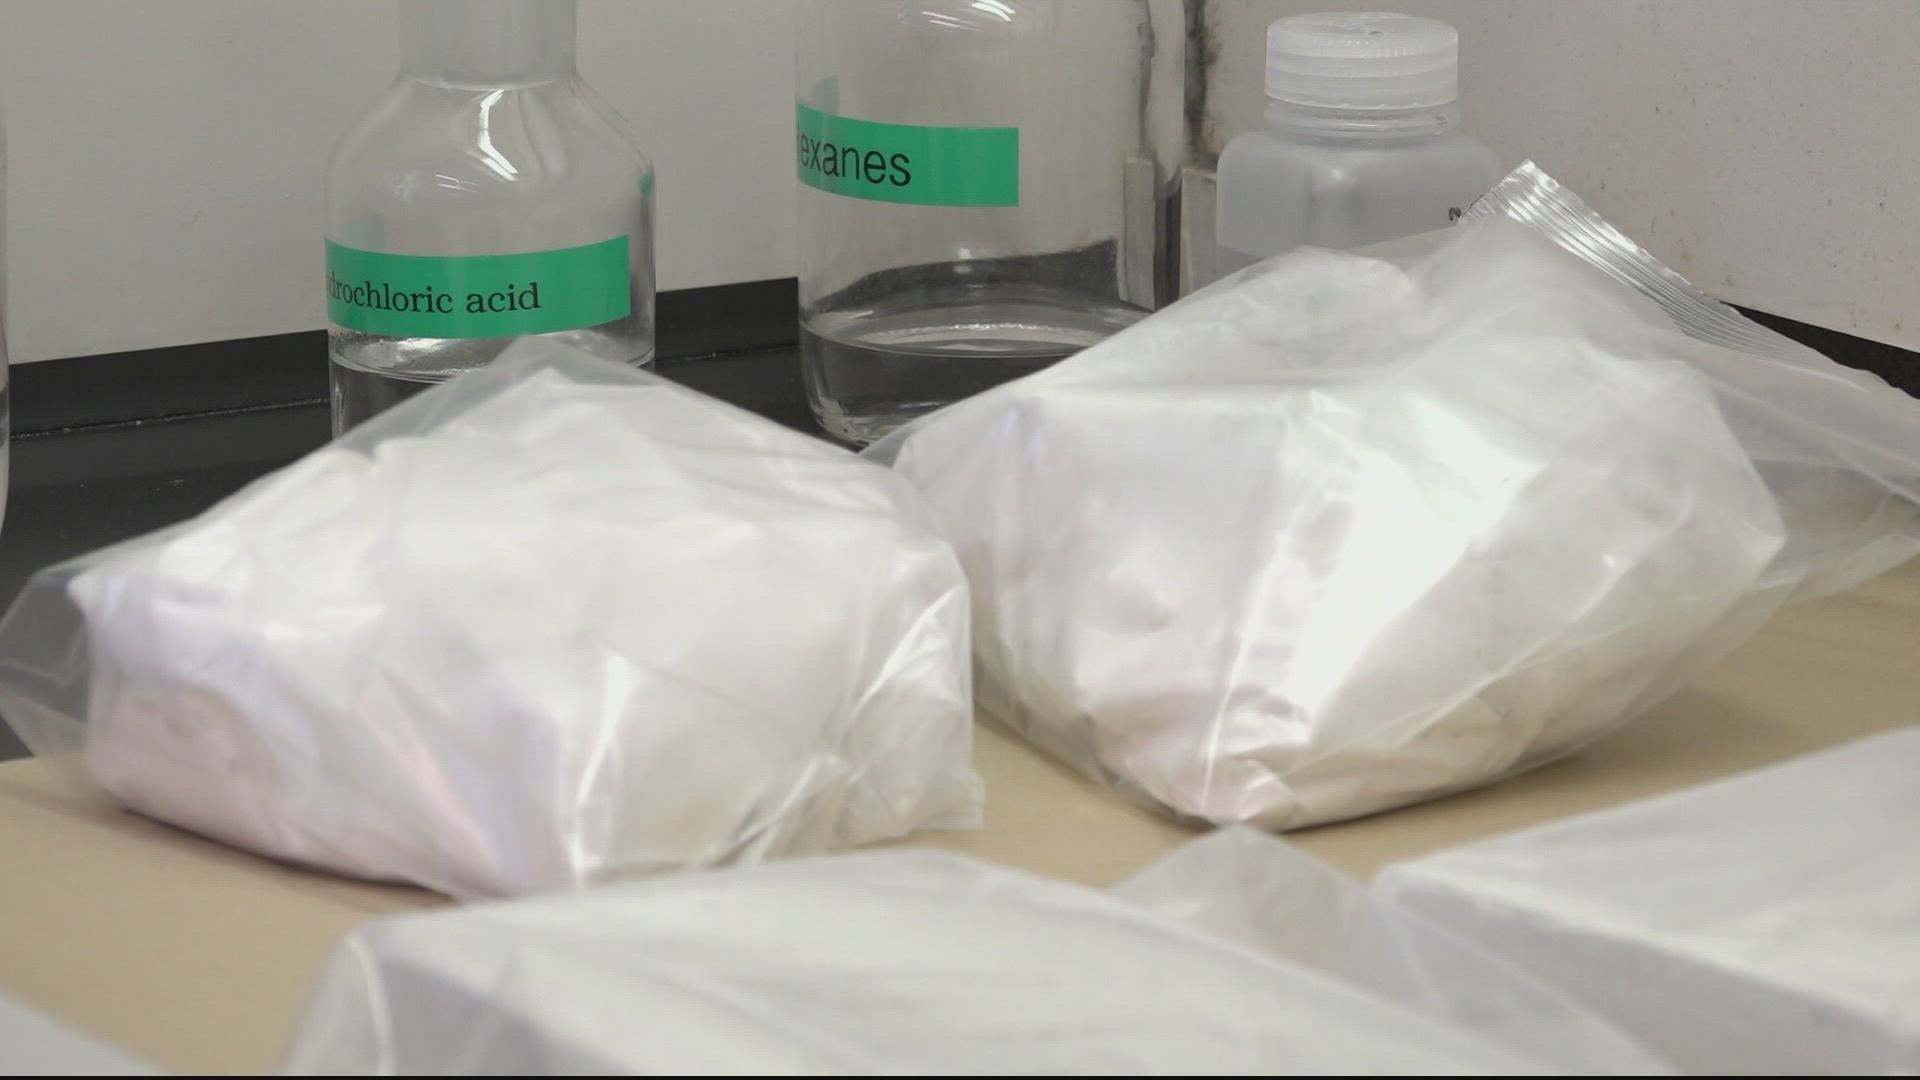 DEA chemists put their lives at risk testing dangerous fentanyl-laced drugs.